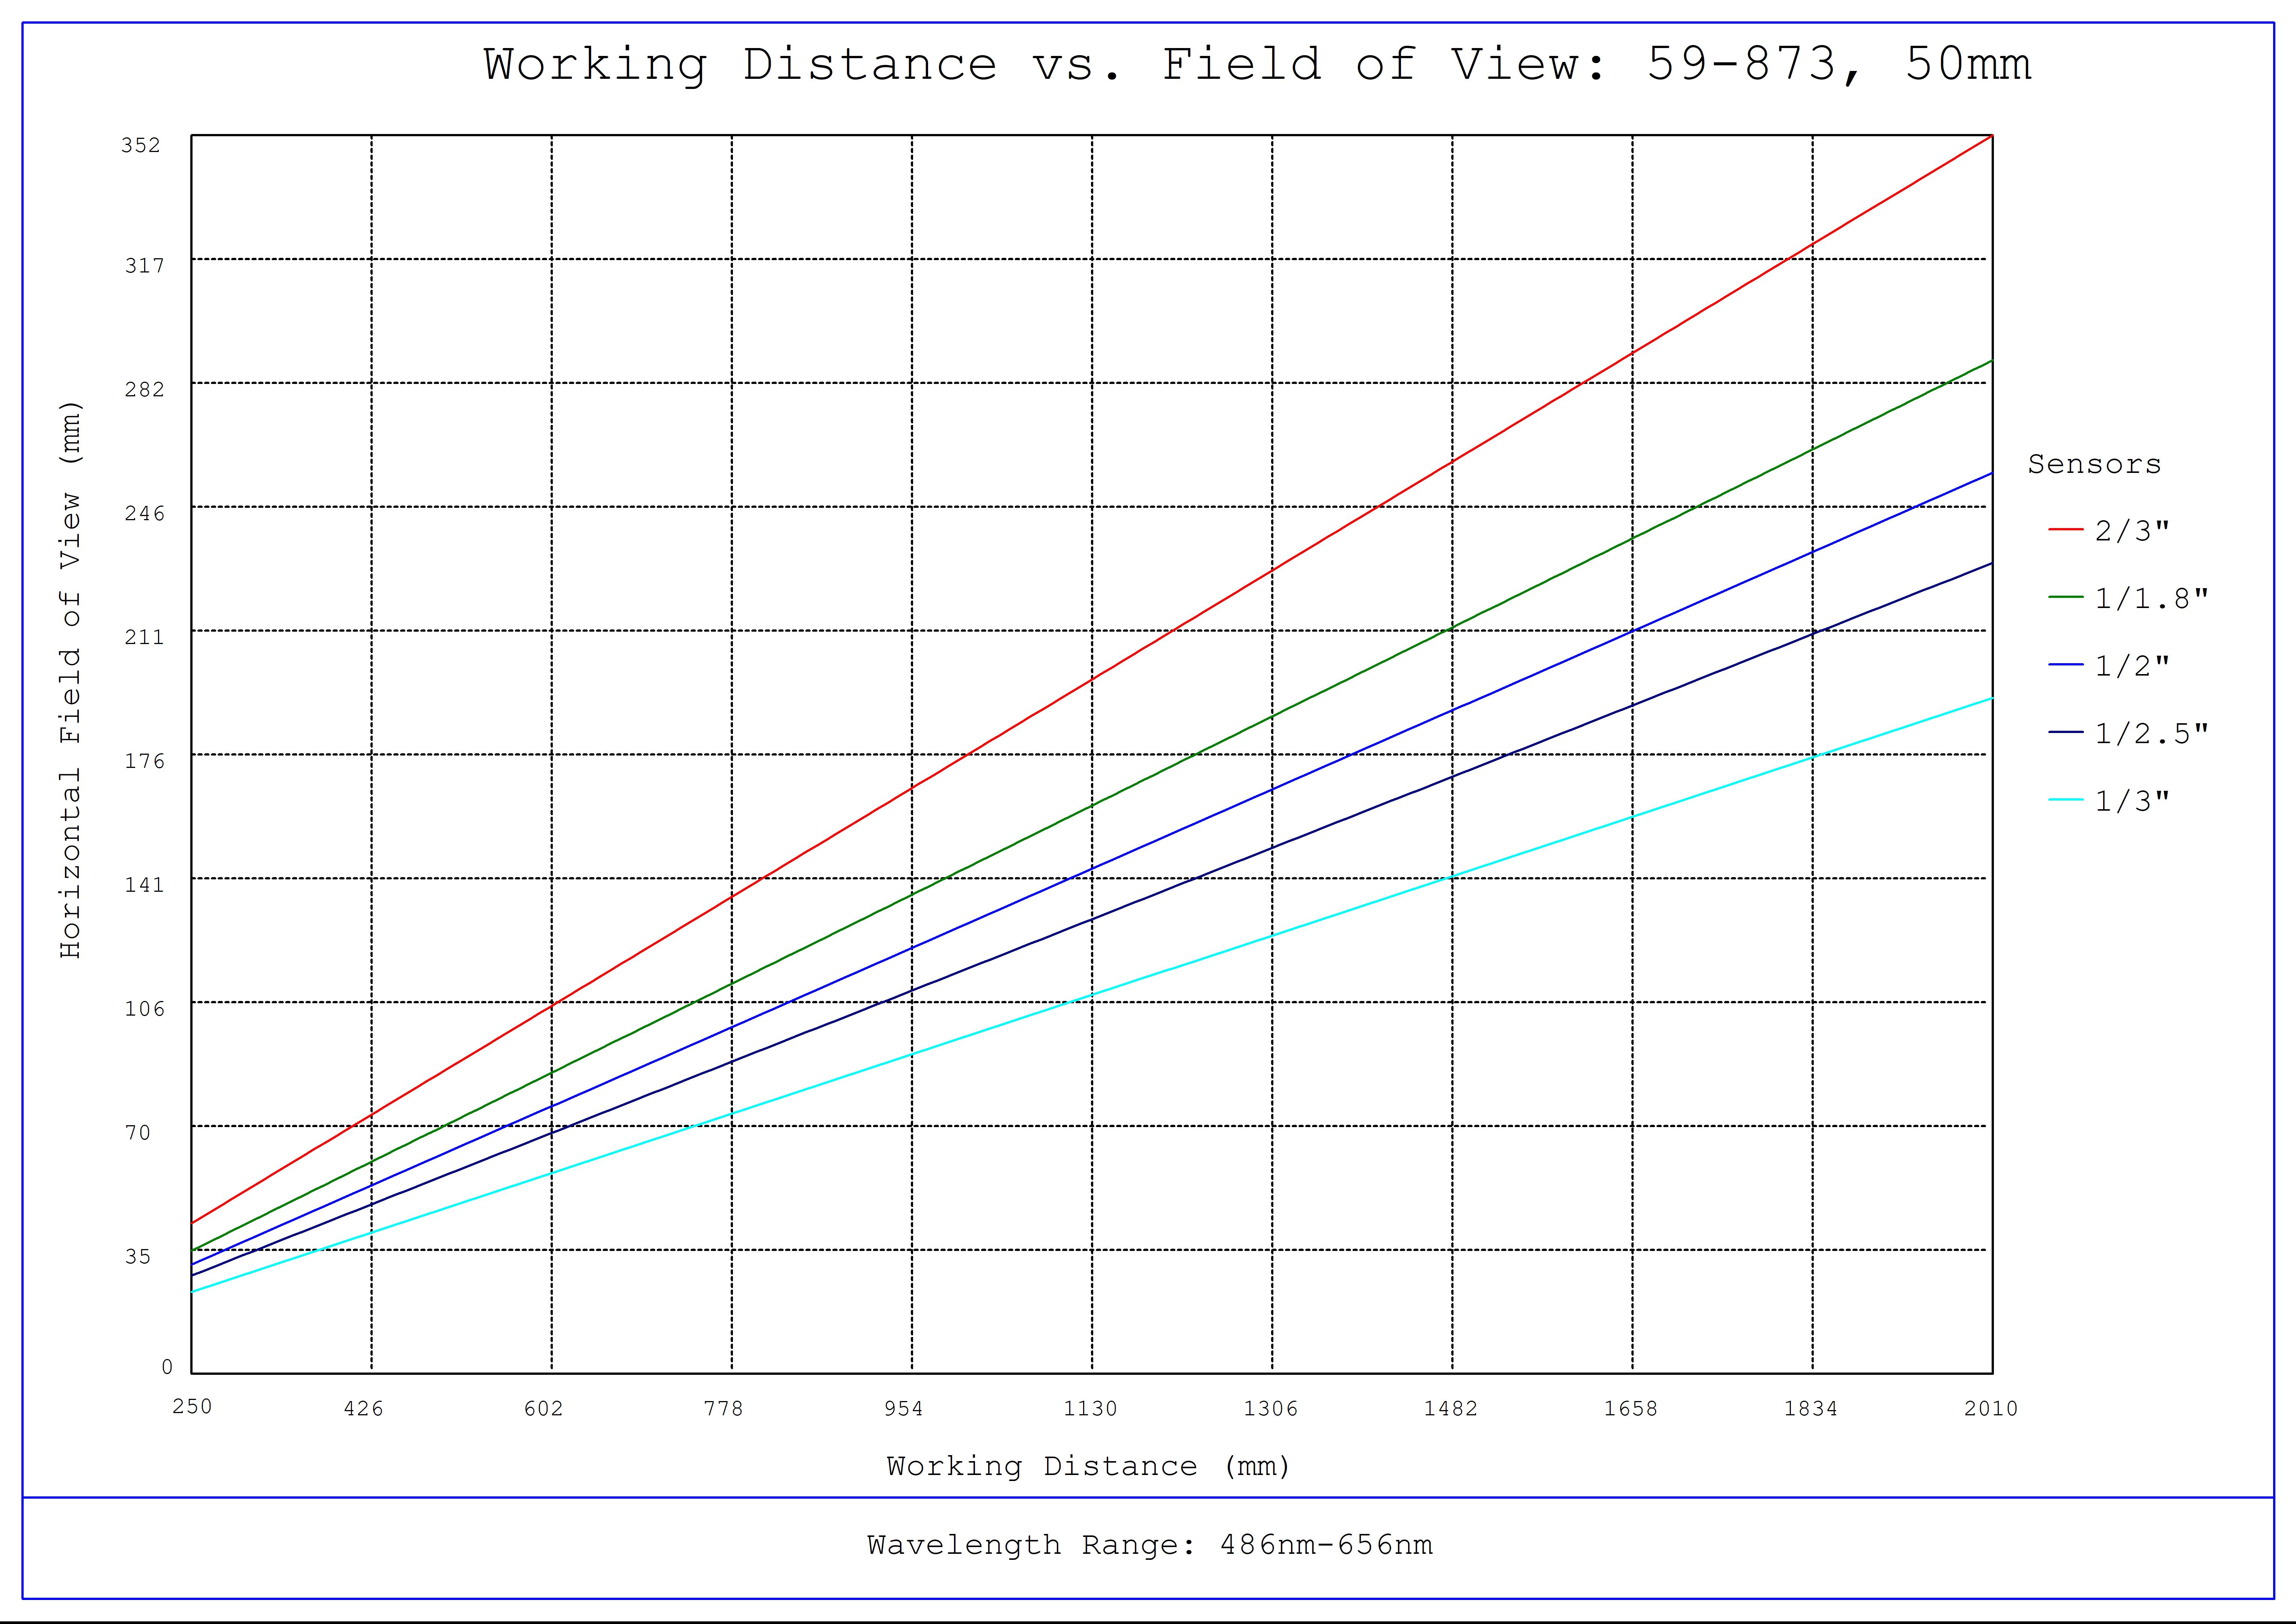 #59-873, 50mm C Series Fixed Focal Length Lens, Working Distance versus Field of View Plot